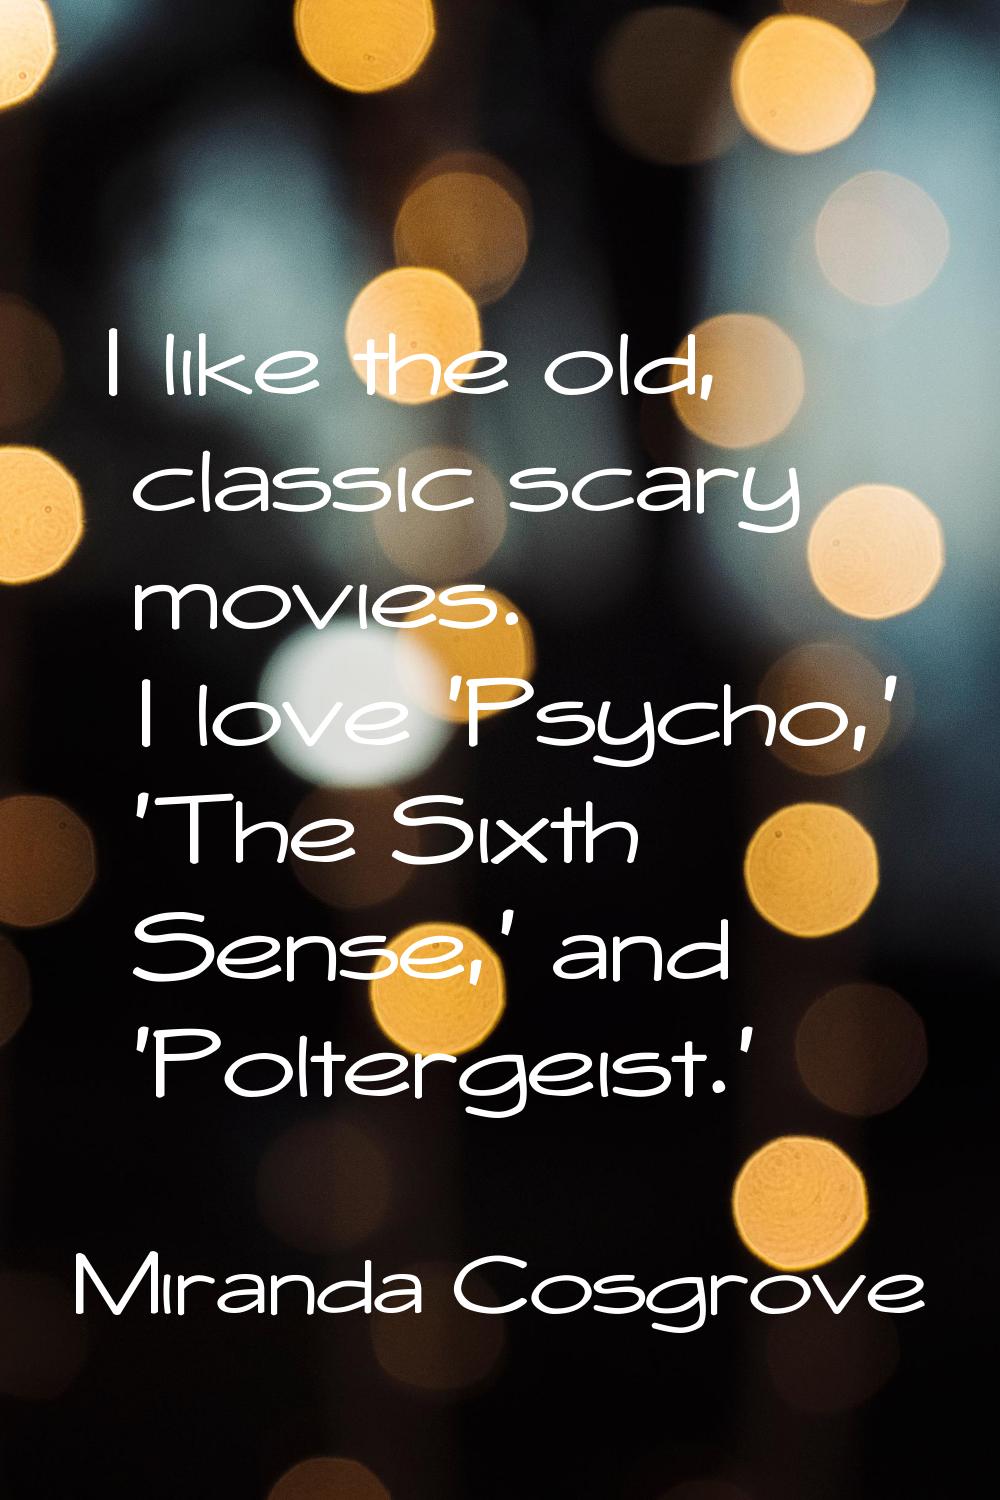 I like the old, classic scary movies. I love 'Psycho,' 'The Sixth Sense,' and 'Poltergeist.'